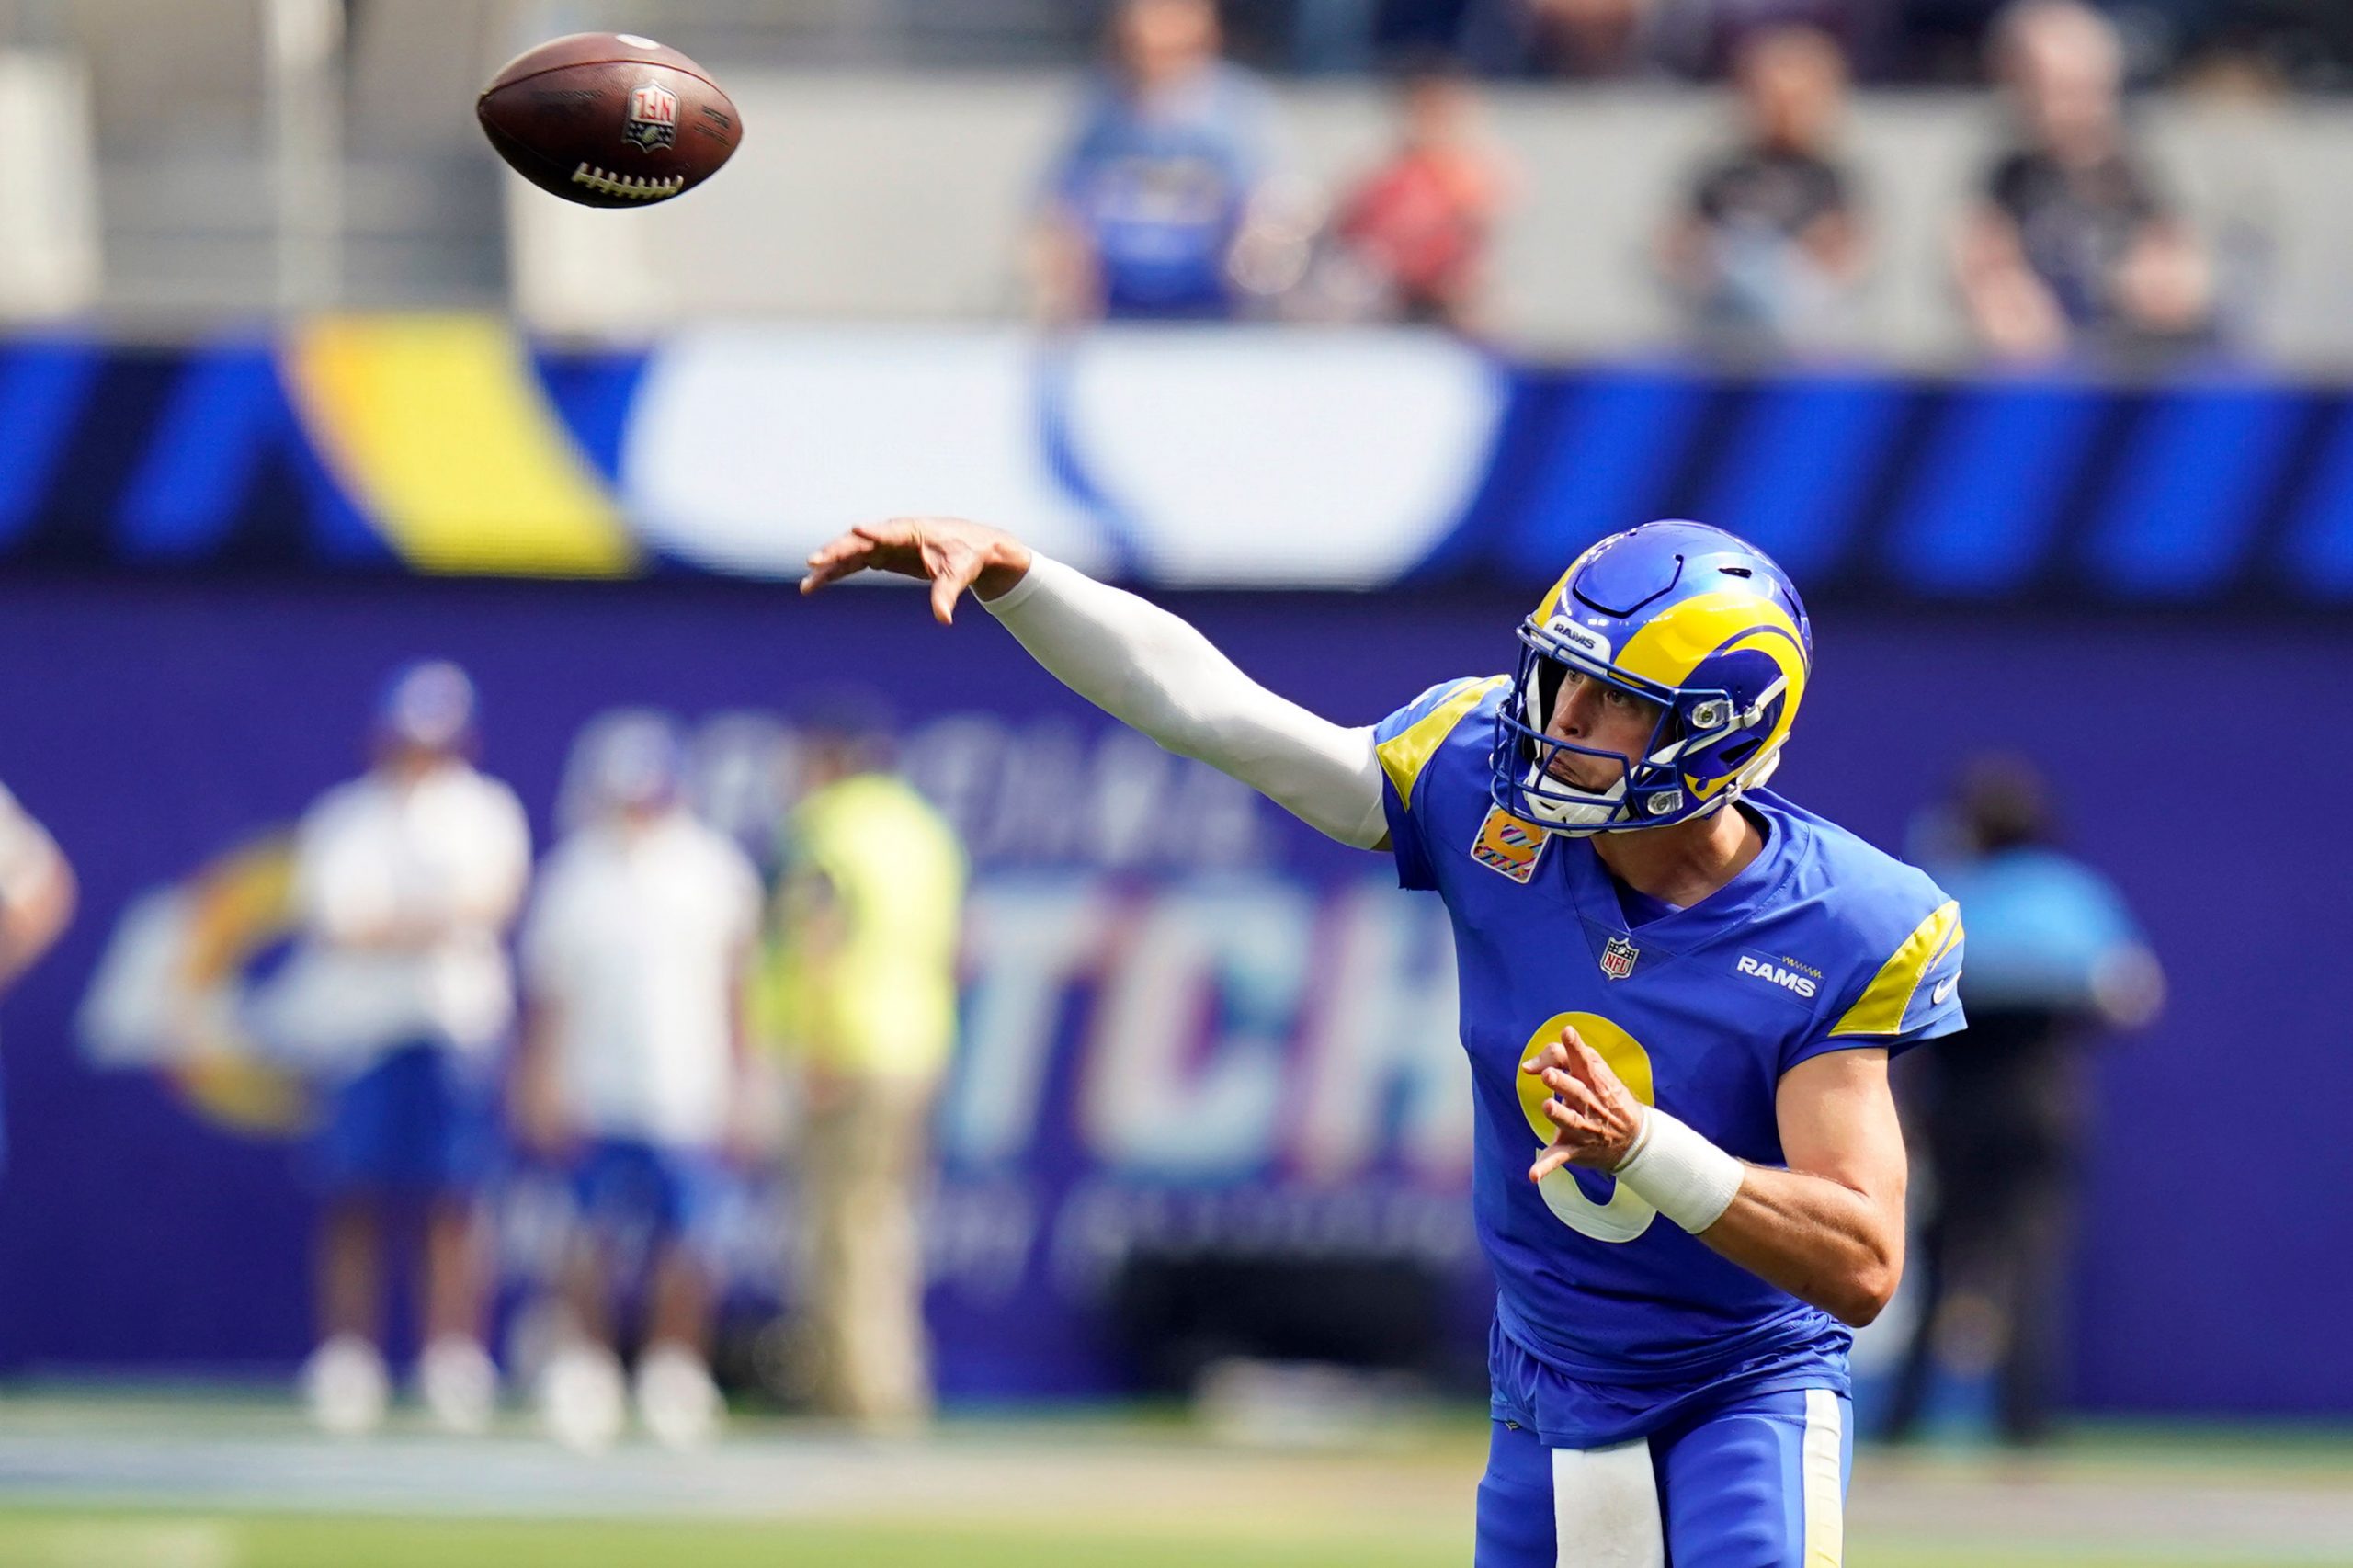 NFL: Matthew Stafford stars with 4 TDs as Los Angeles Rams rout New York Giants